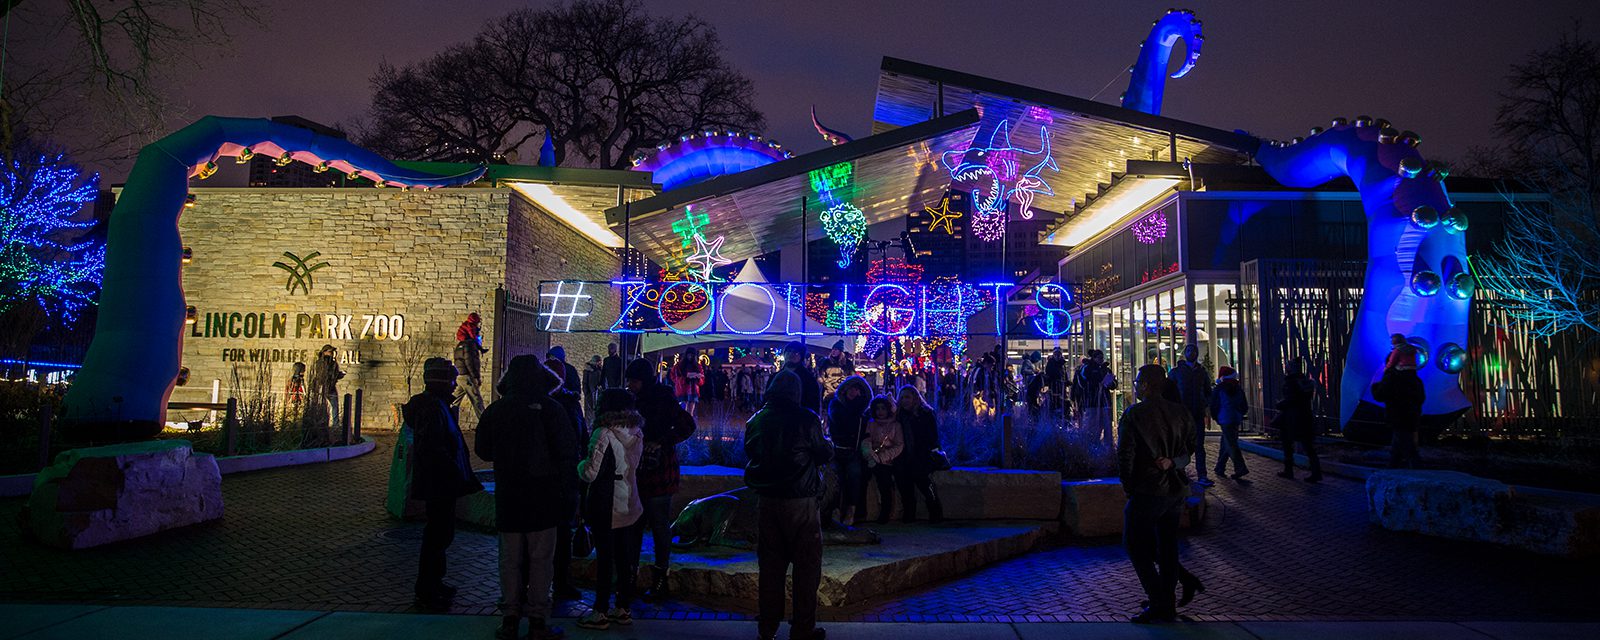 ZooLights, a Holiday Staple in Chicago, Returns to Lincoln Park Zoo for 29th Year With New Displays